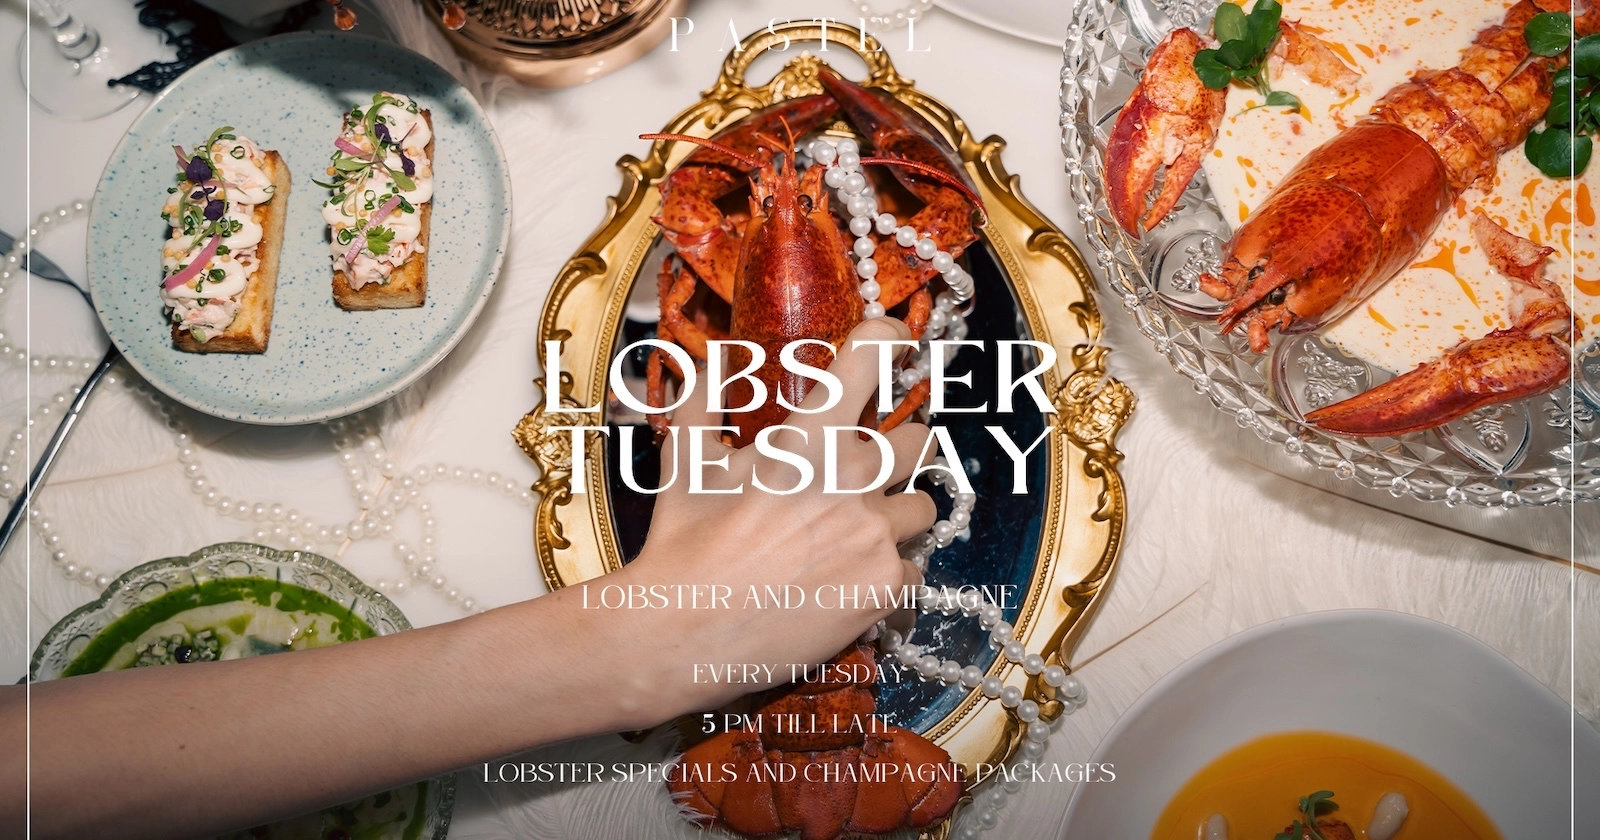 banner for the Lobster Tuesday event by Pastel Bangkok, the best place to enjoy lobster and champagne in Bangkok Thailand